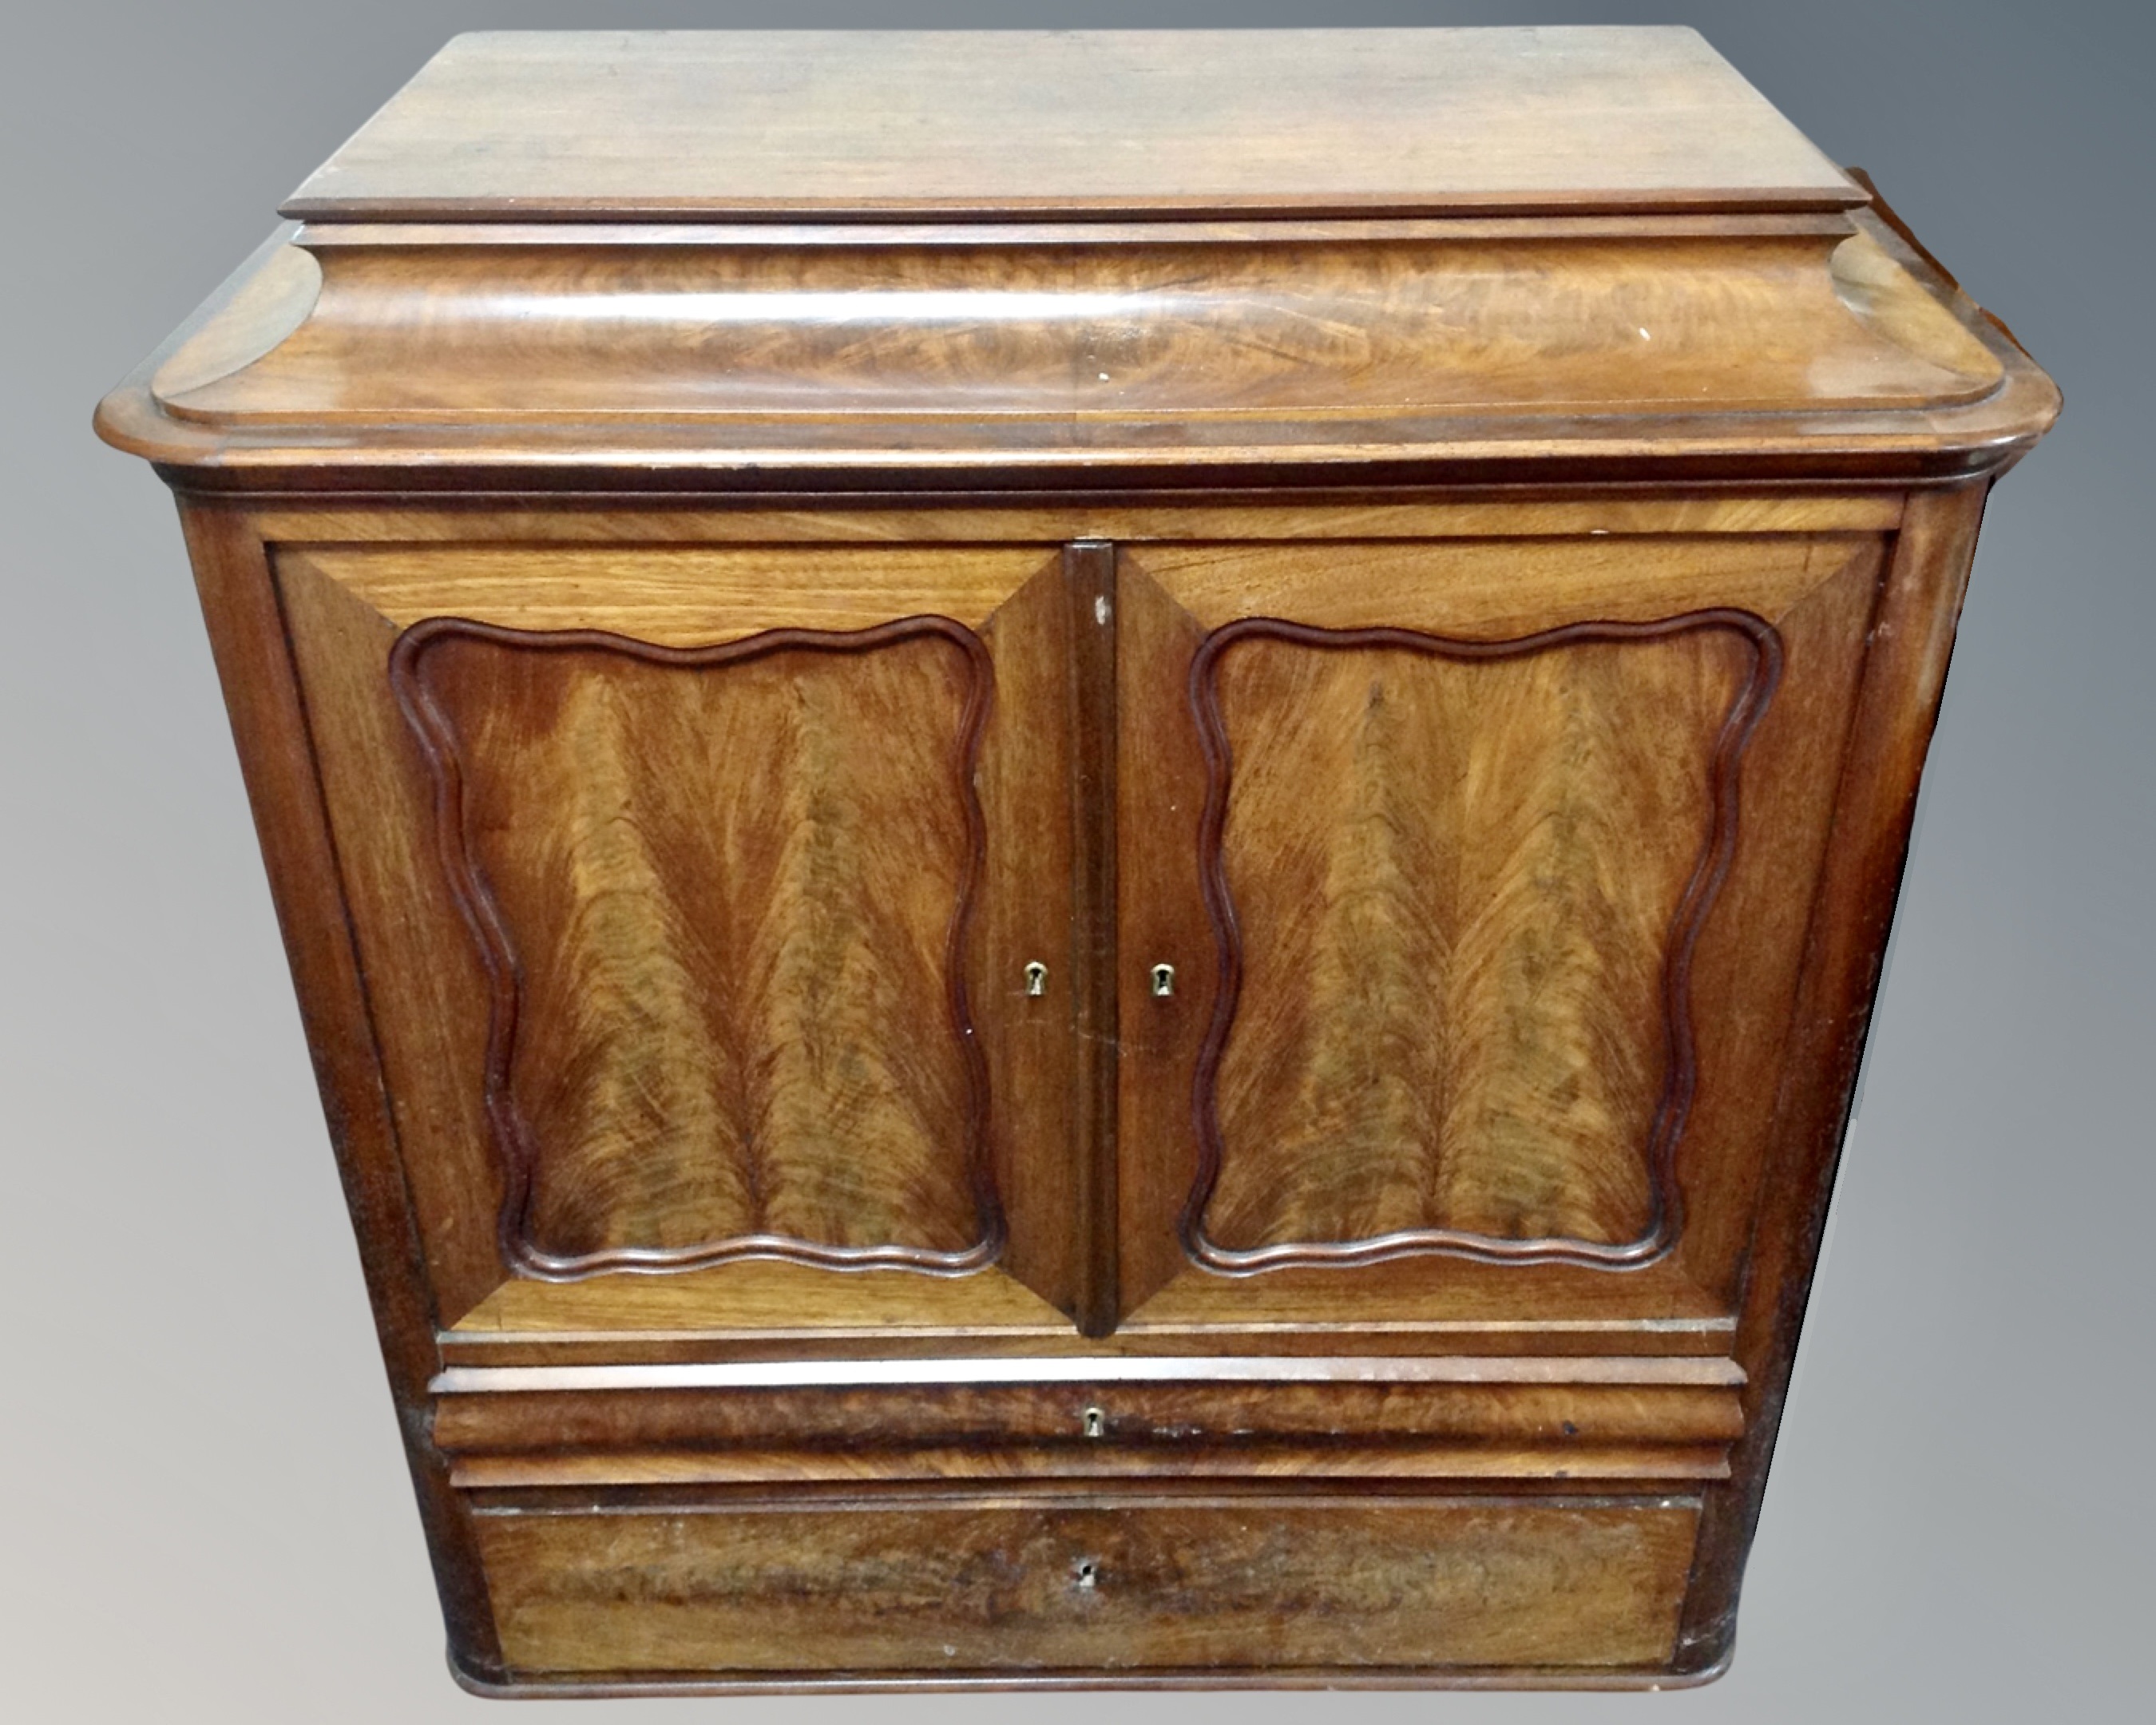 A 19th century continental mahogany double door cocktail cabinet fitted with two drawers beneath.